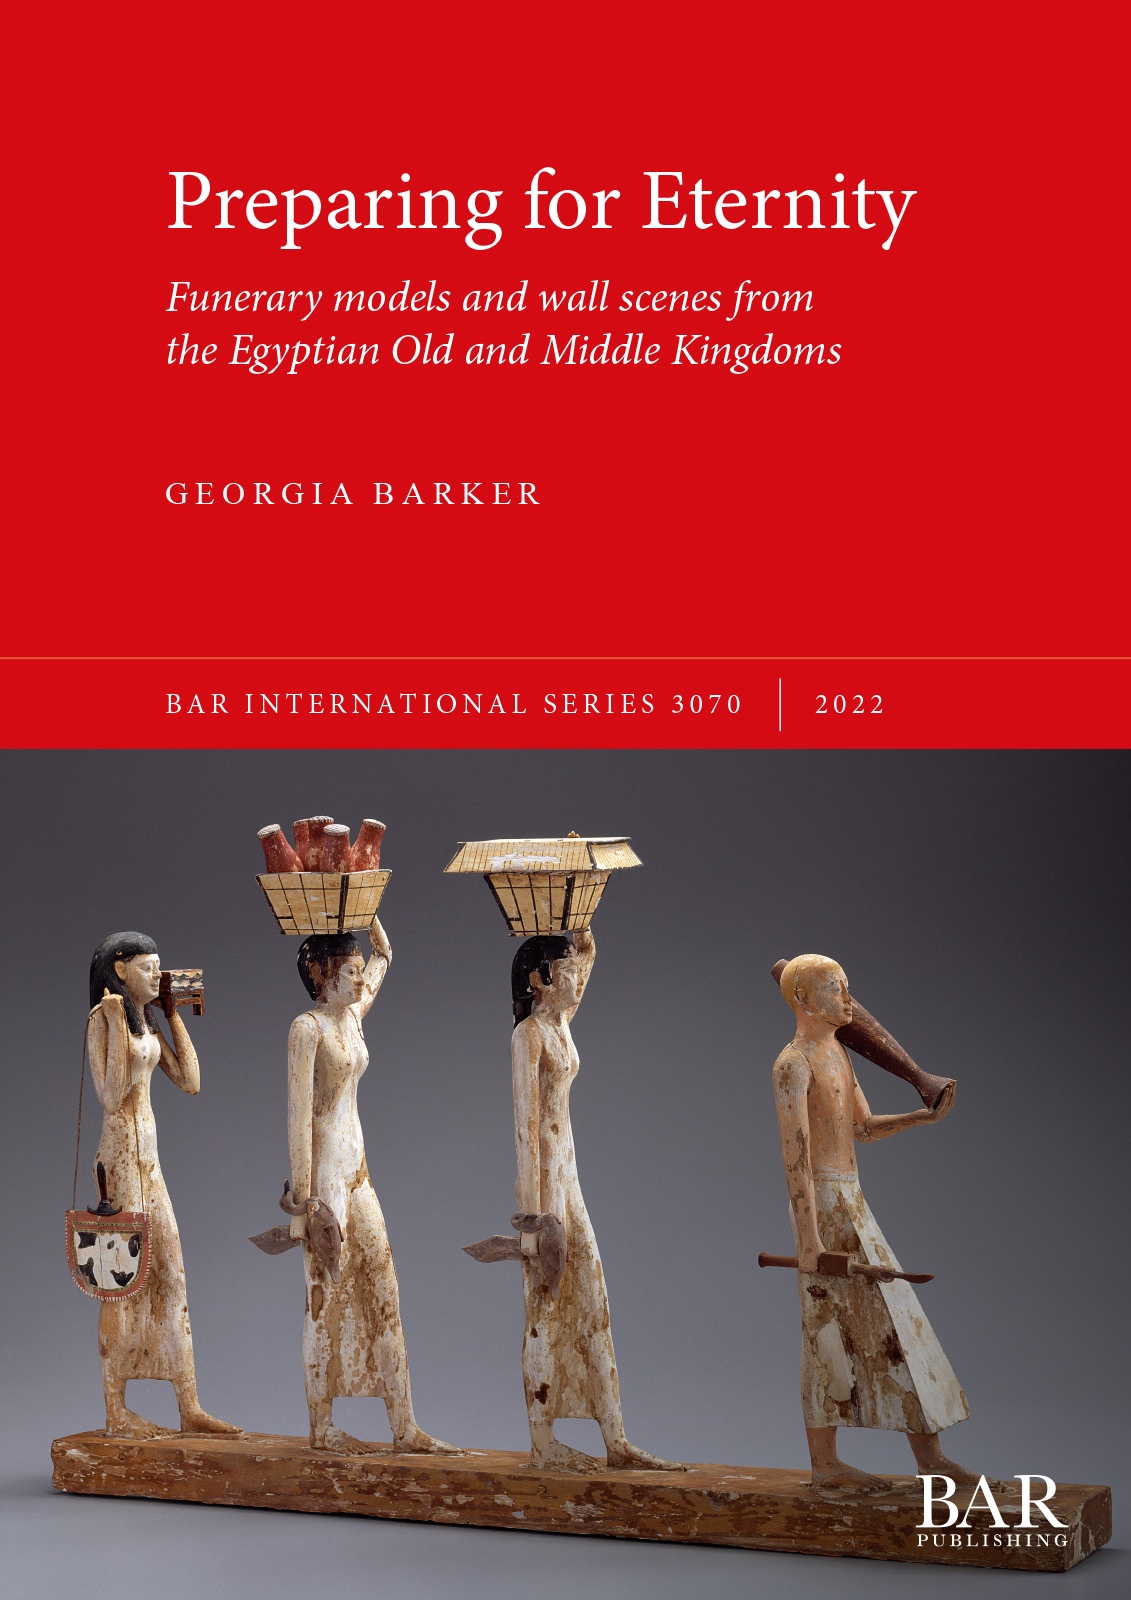 title page of book by Georgia Barker, 2022. Titled, Preparing for Eternity: Funerary models and wall scenes from the Egyptian Old and Middle Kingdoms